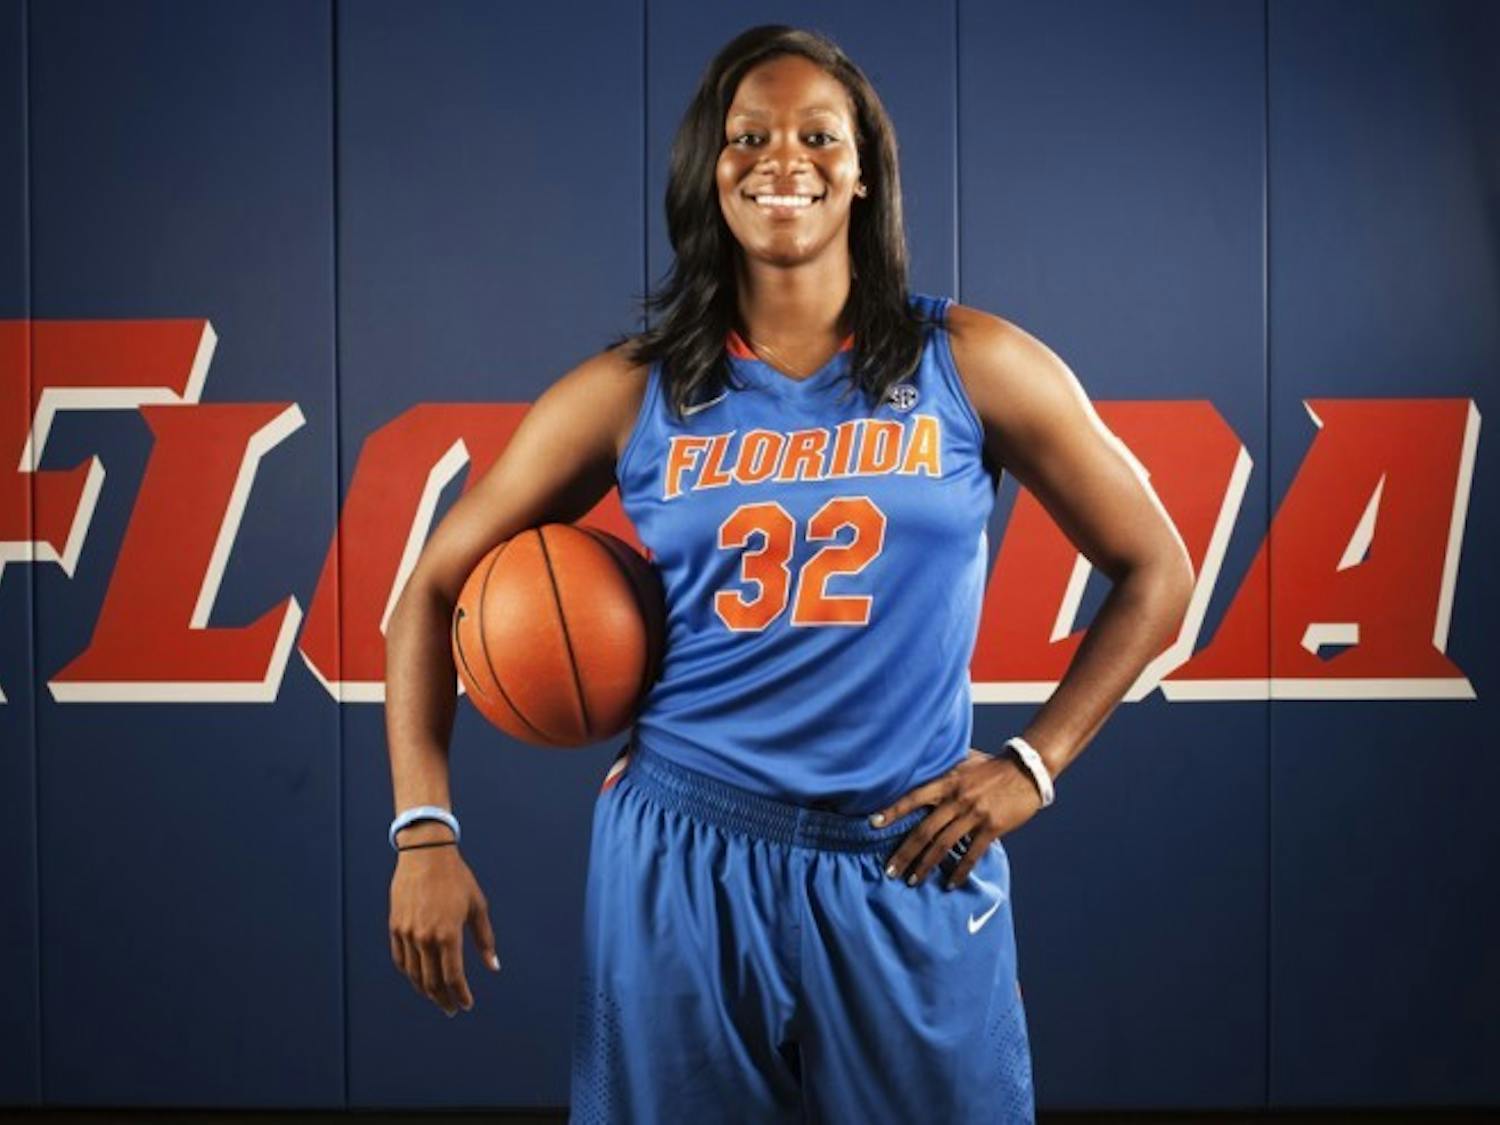 Senior Jennifer George poses for photos during UF Media Day on Oct. 10. George racked up 15 points and nine rebounds in a losing effort against Michigan on Saturday.